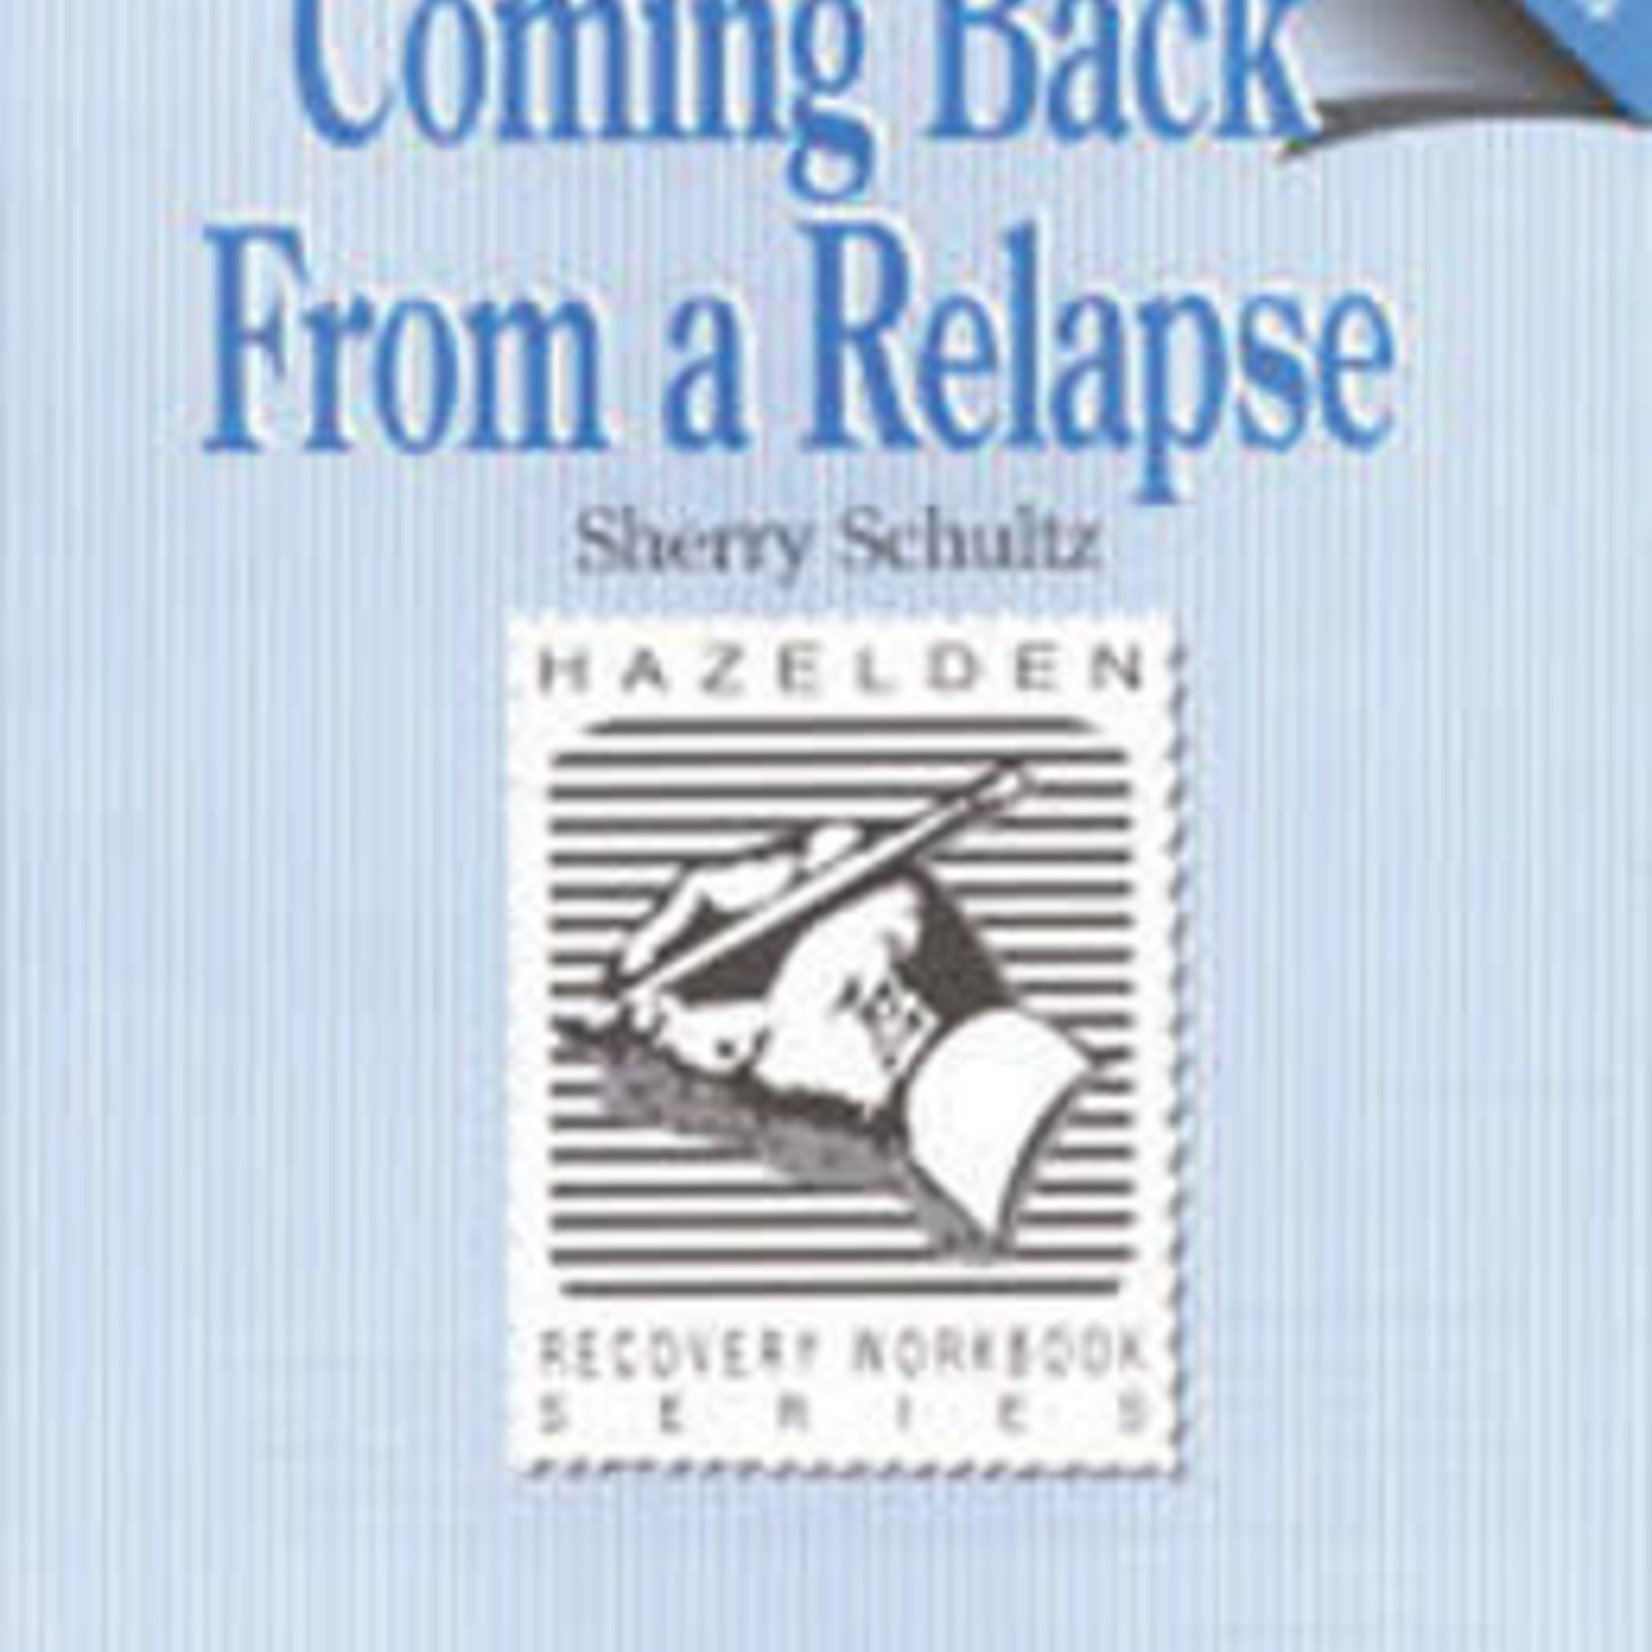 Coming Back From a Relapse [Workbook]